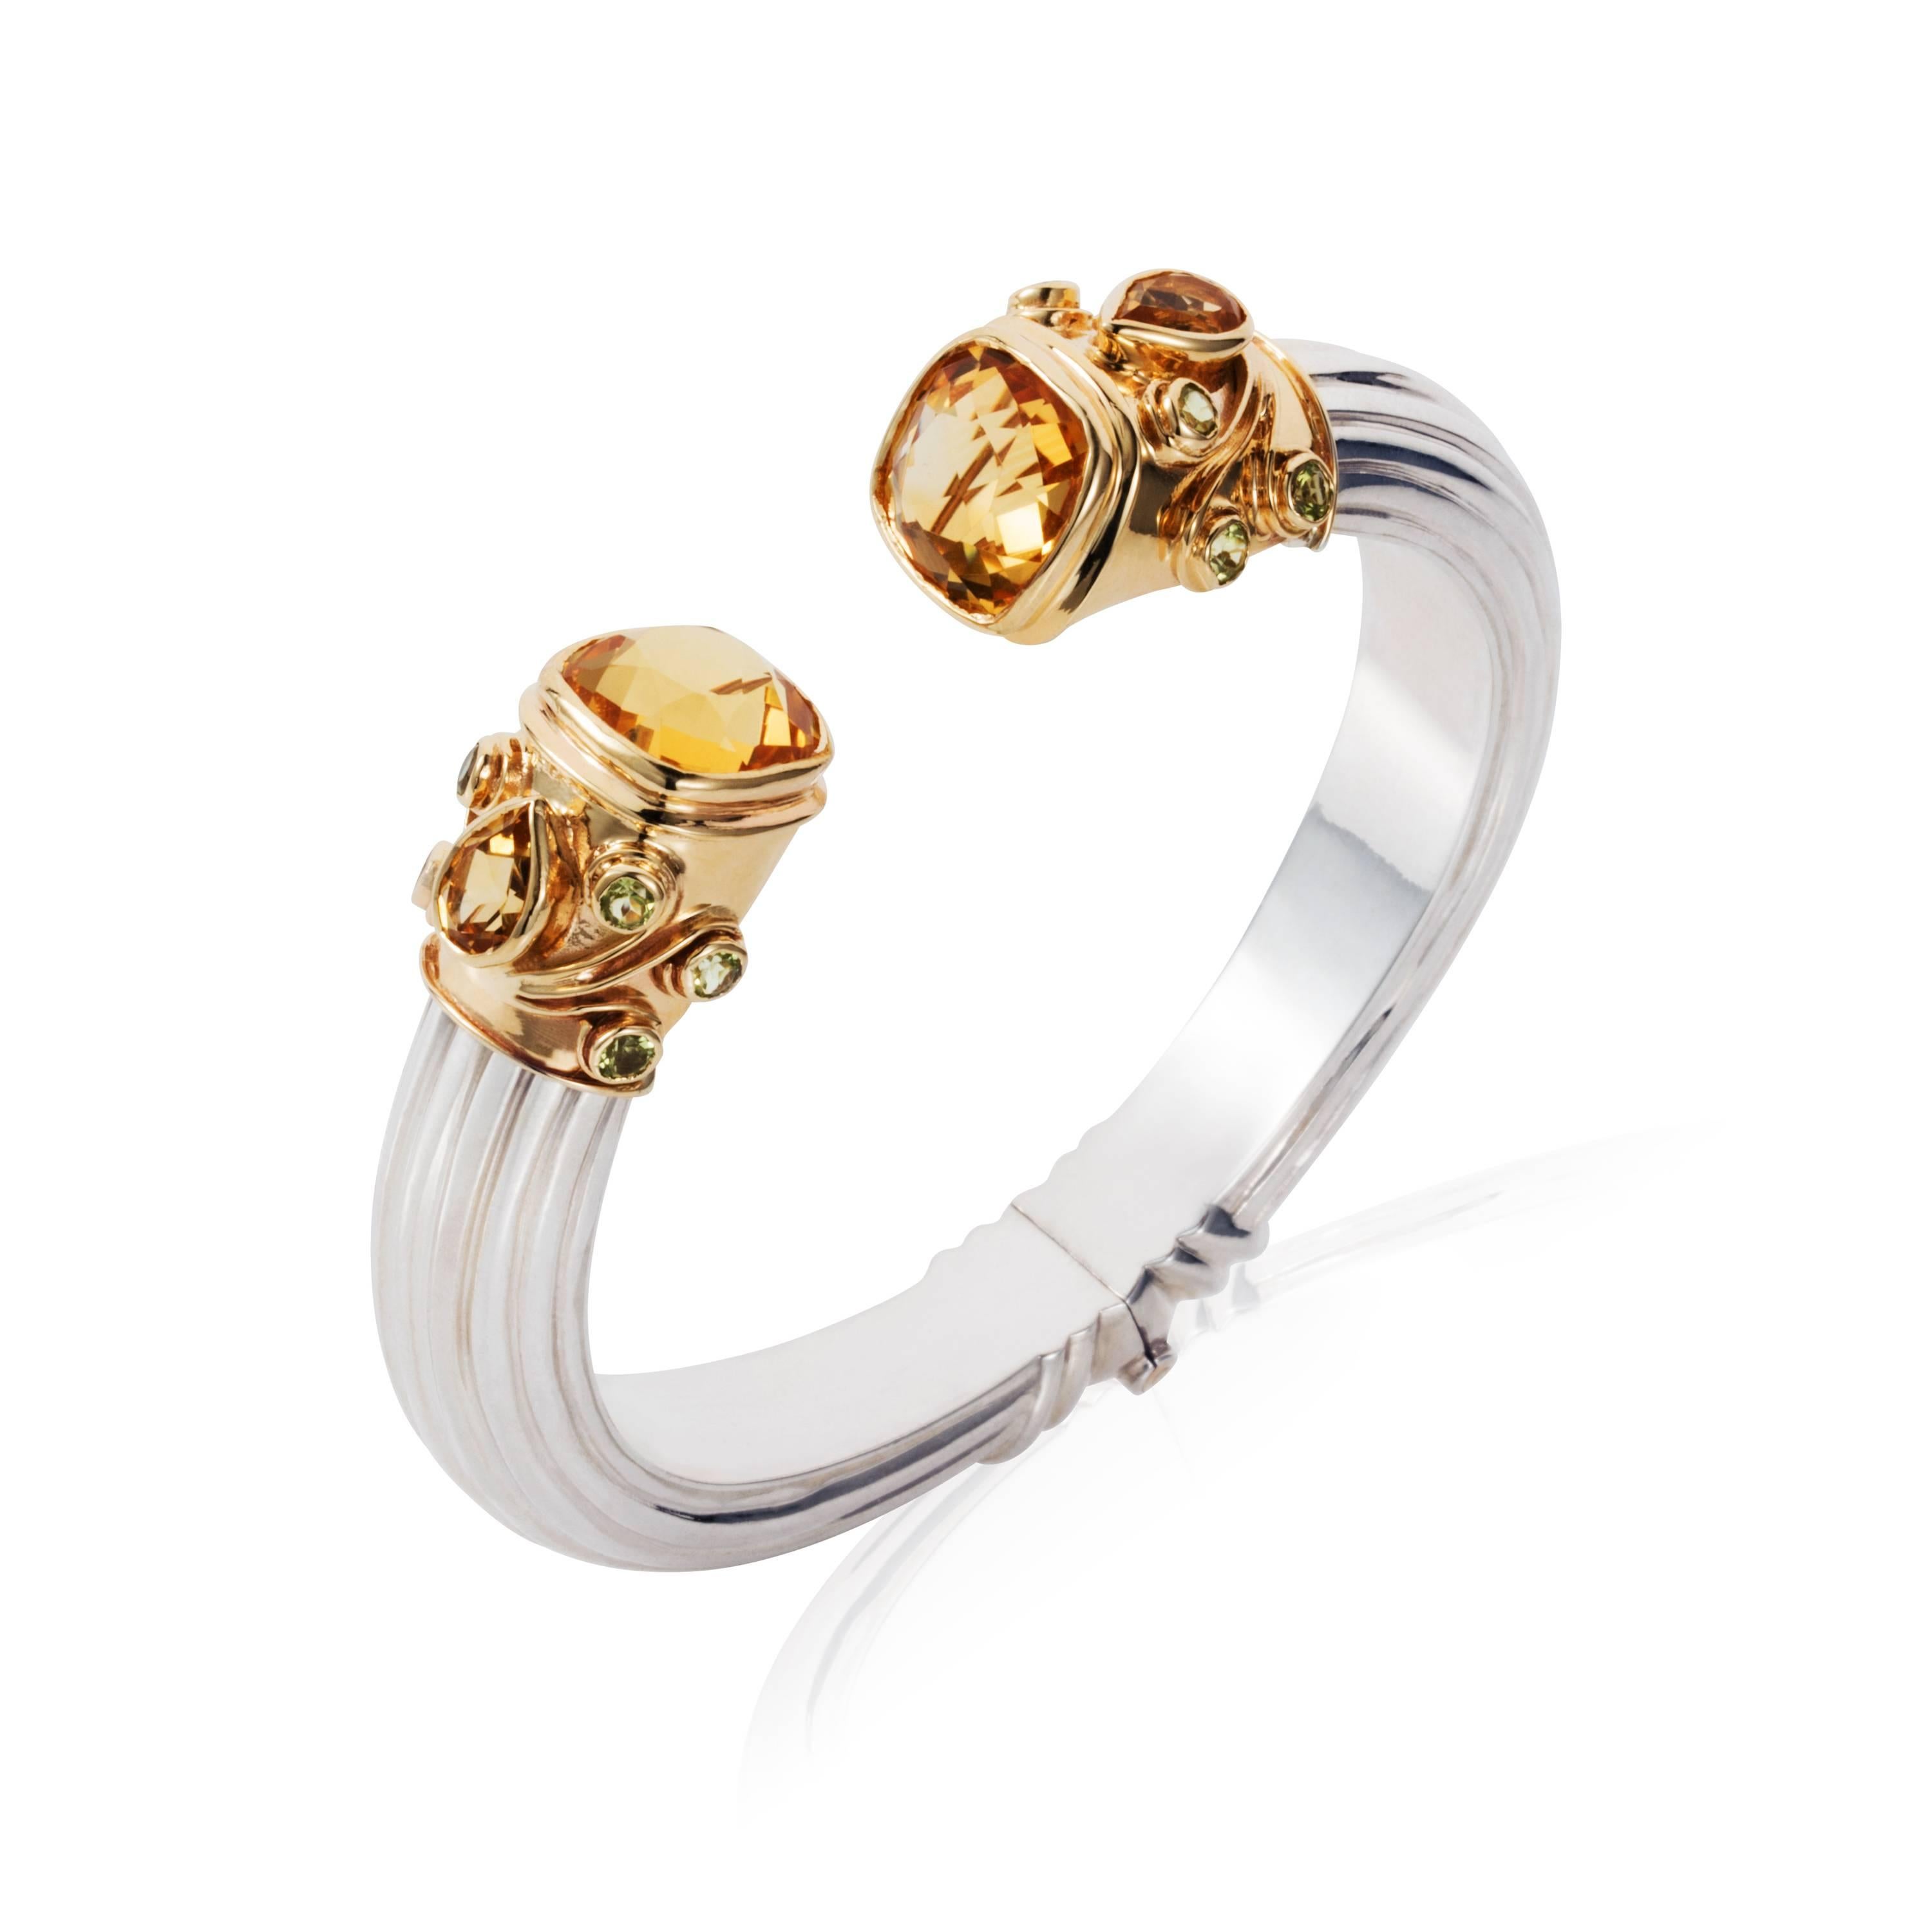 Blue Topaz Cuff bangle detail:
Gross weight: 63.340 grams 
Gold weight: 8.800 grams 
Total stone weight: 17.65 carats 
Measurements: 48mm by 60mm.  Different sizes available.

Citrine Cuff bangle detail:
Gross weight: 63.600 grams 
Gold weight: